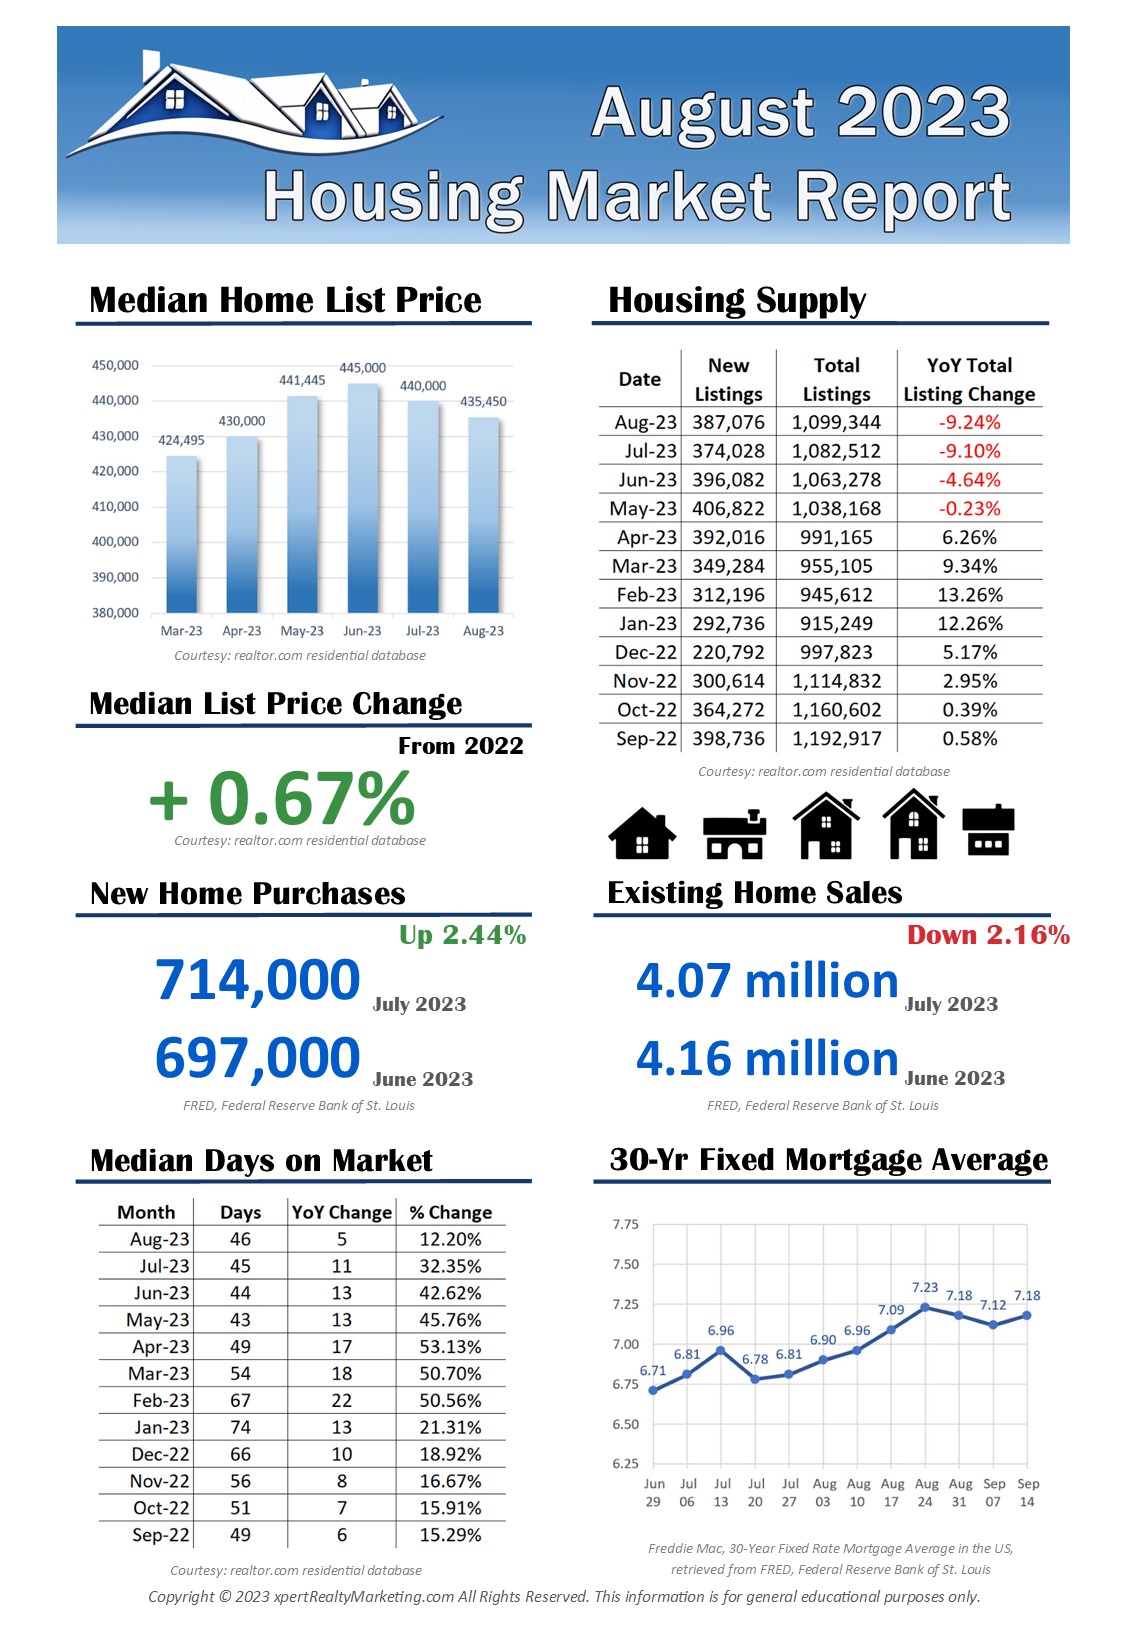 August 2023 Housing Market Report - Infographic